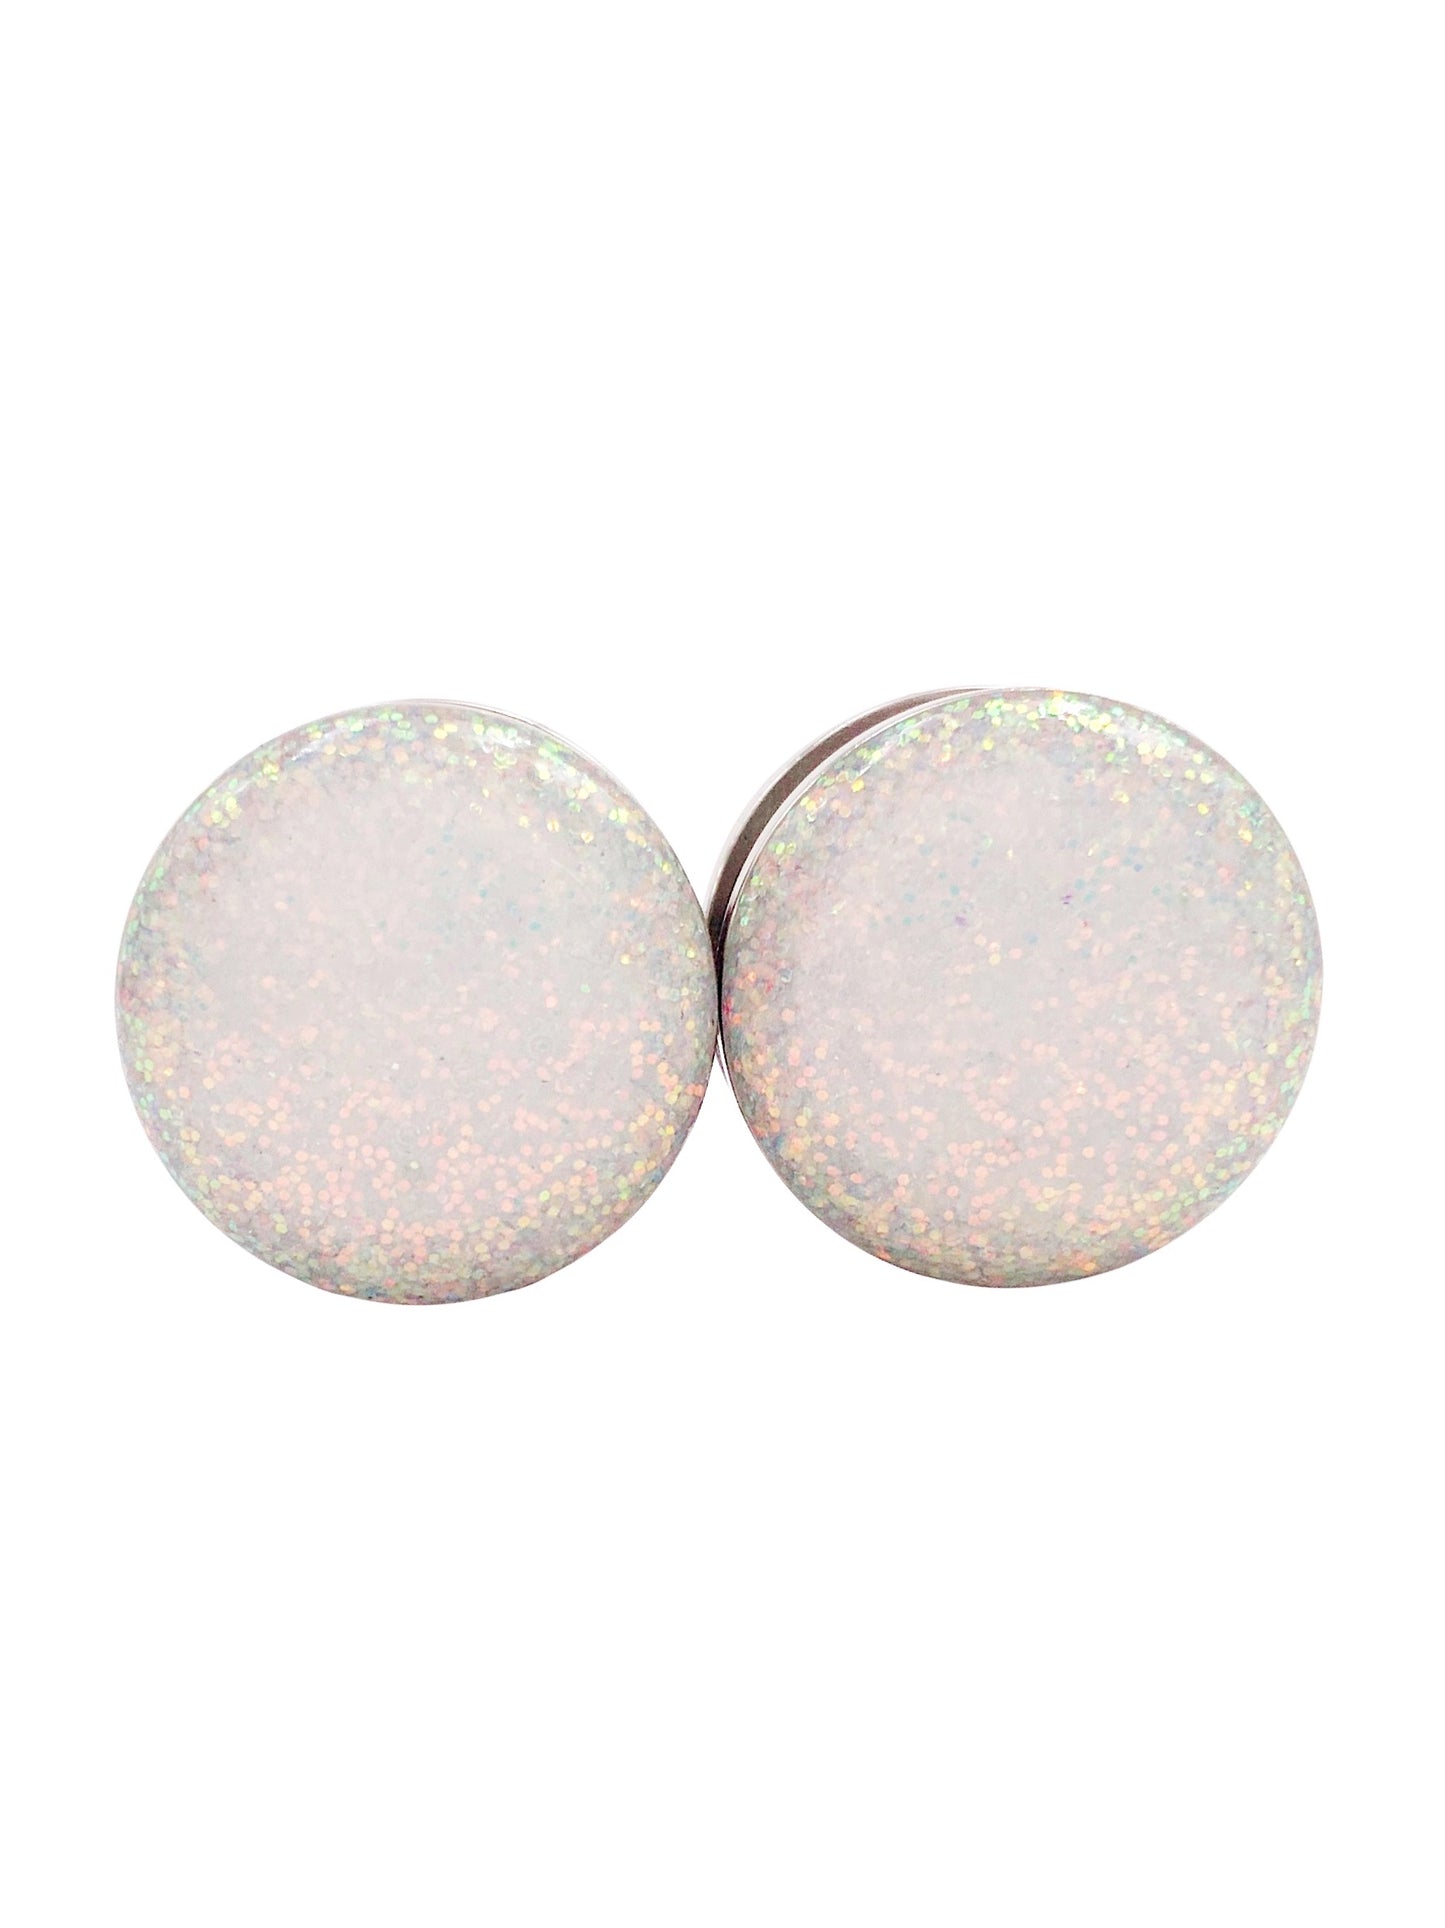 Frosted White Iridescent Sparkle plugs